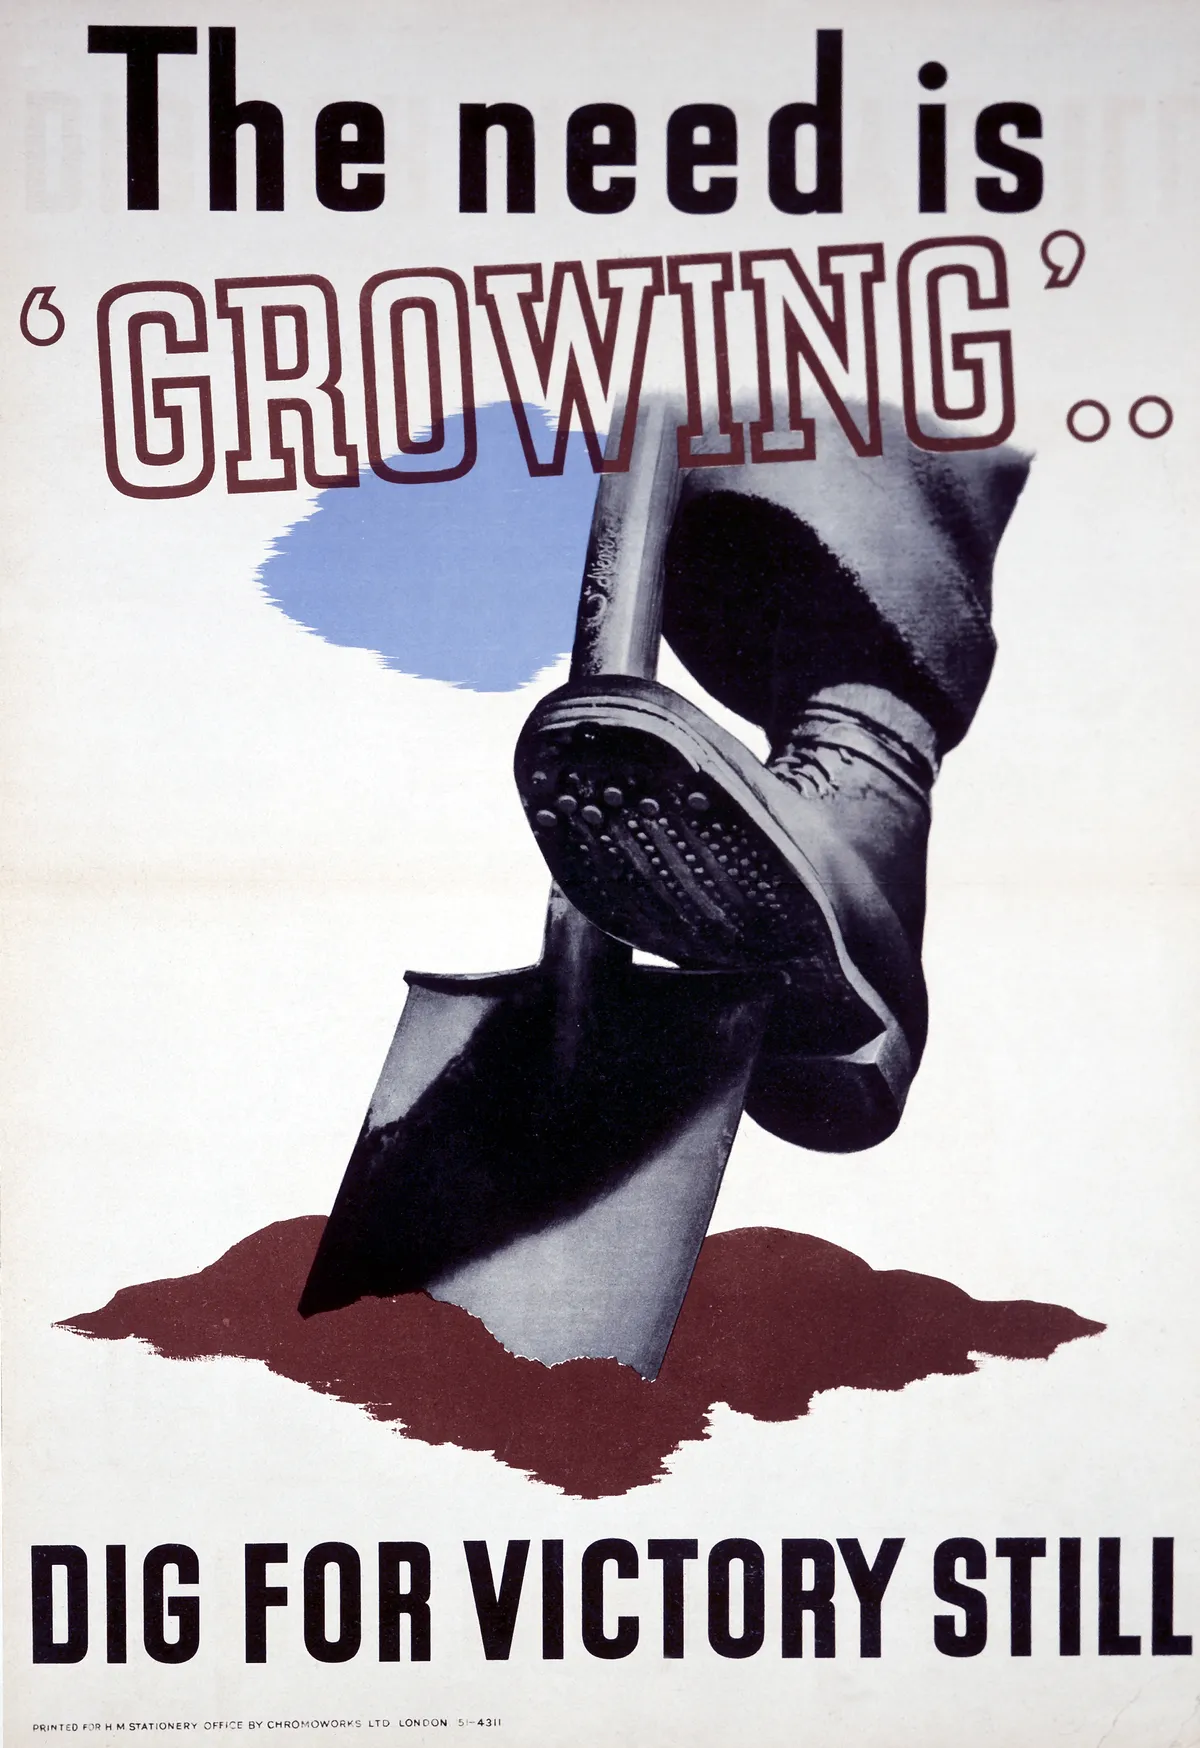 World War II poster - Dig For Victory